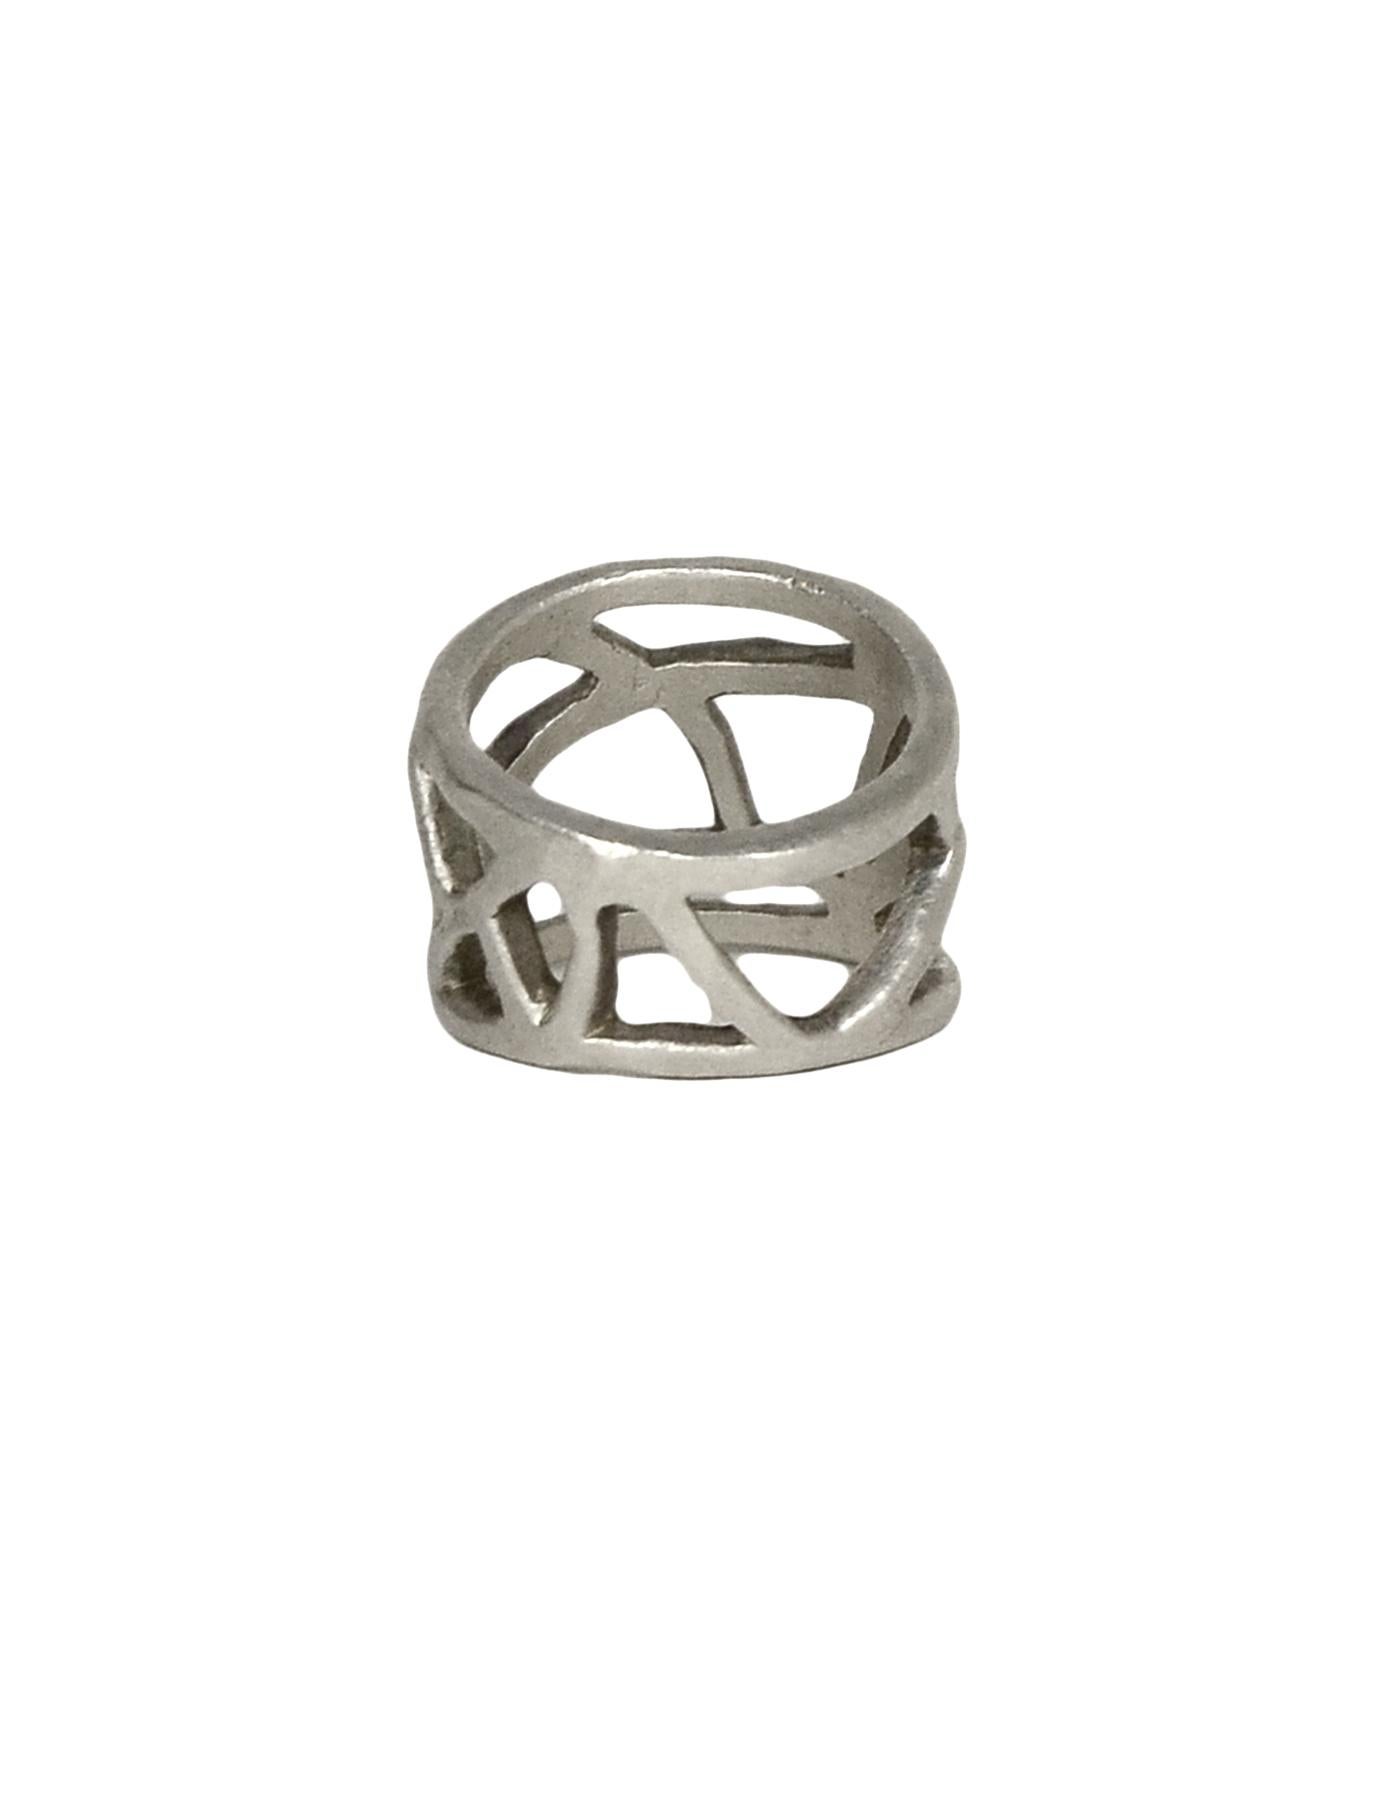 Saundra Messinger Sterling Silver Web Ring with Diamonds sz 6.5

Color: Silver
Materials: Sterling Silver
Hallmarks: 